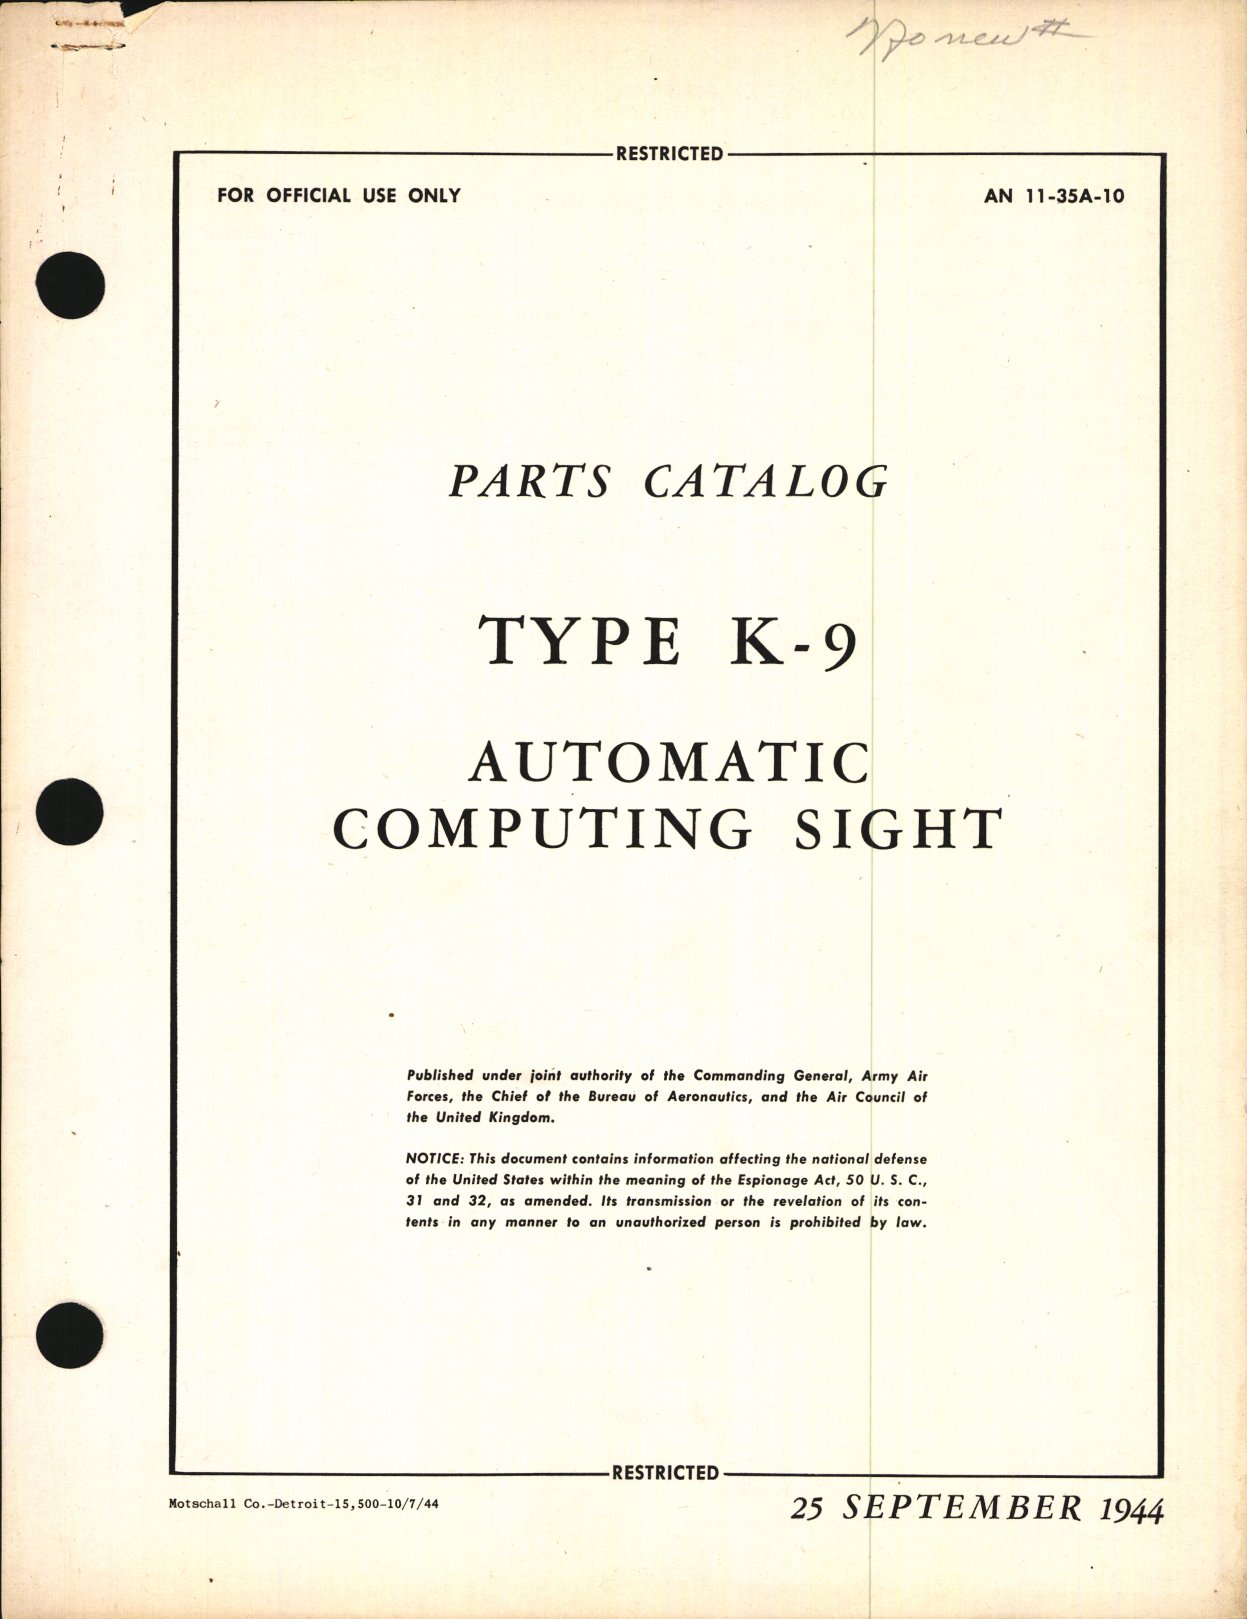 Sample page 1 from AirCorps Library document: Parts Catalog for Type K-9 Automatic Computing Sight